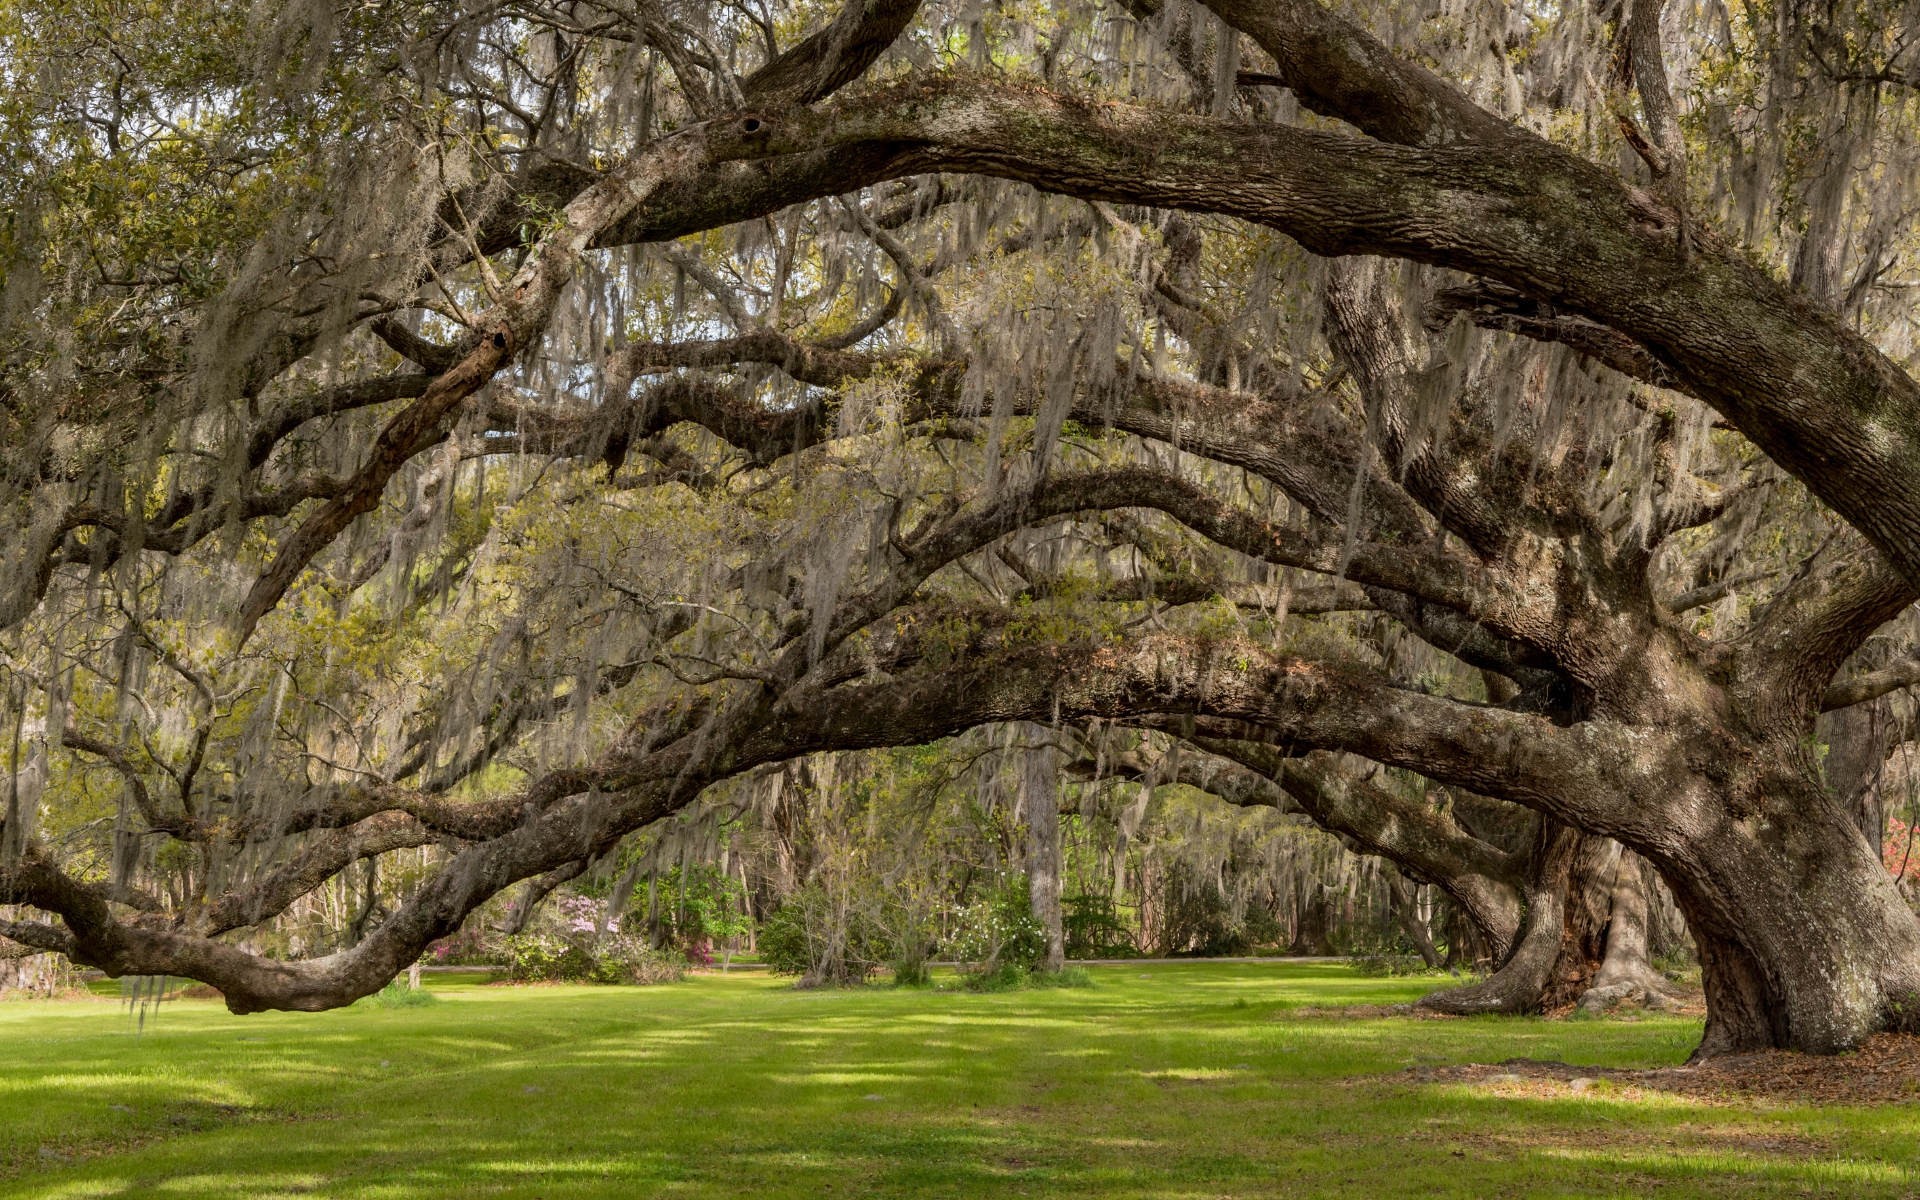 A southern live oak with lots of shade upon a grassy green yard.